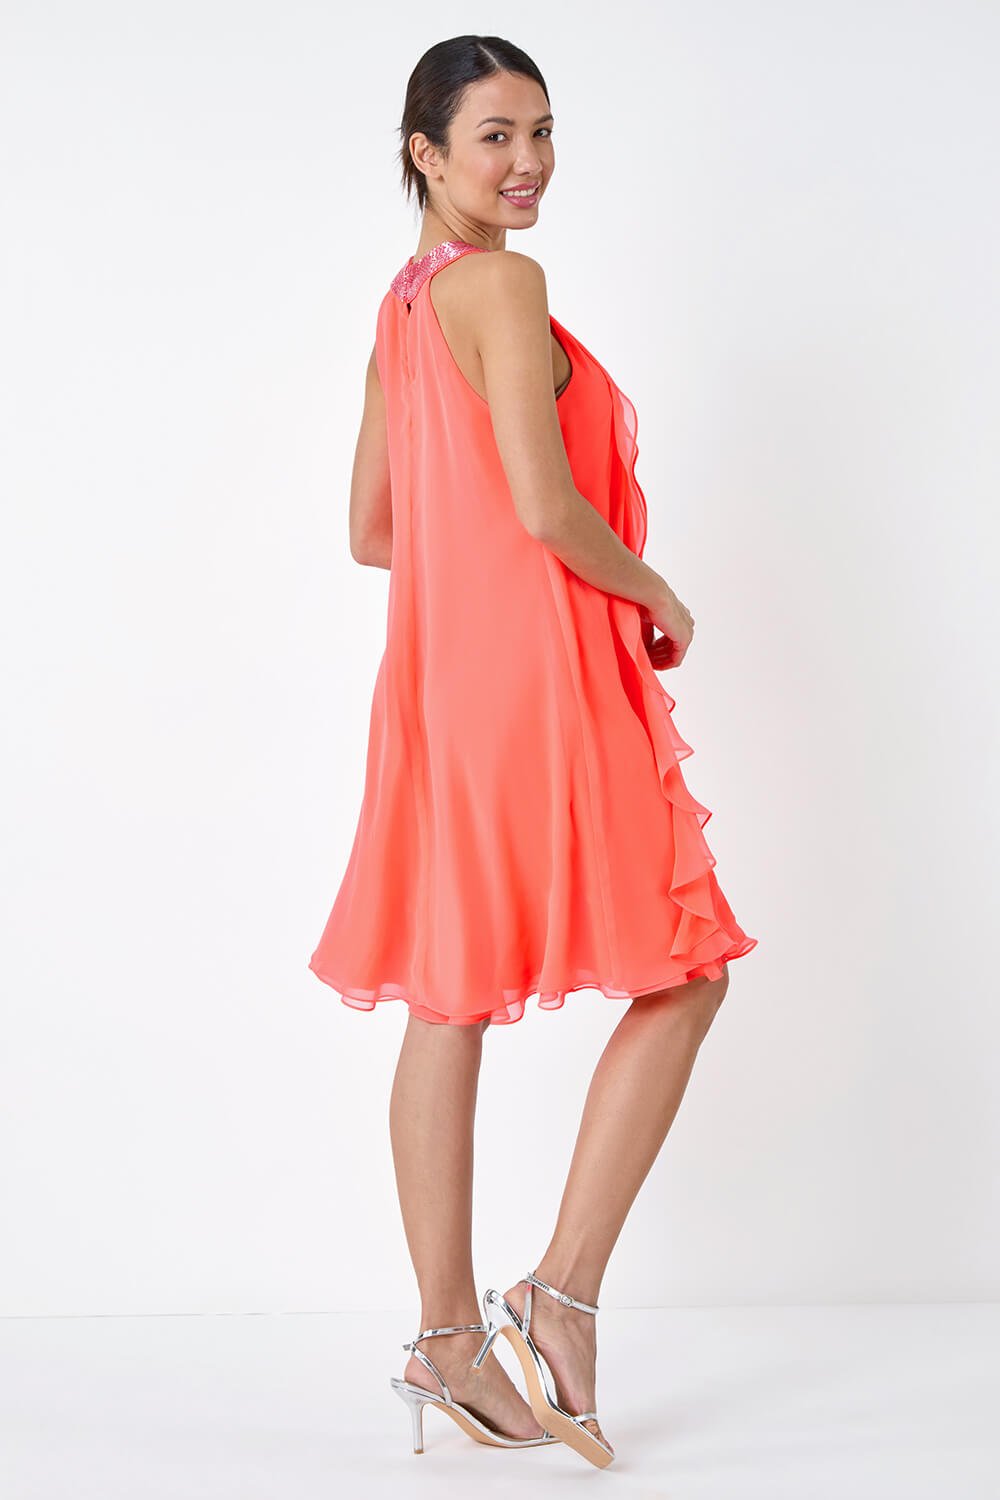 CORAL Embellished Collar Frilled Chiffon Dress, Image 3 of 5